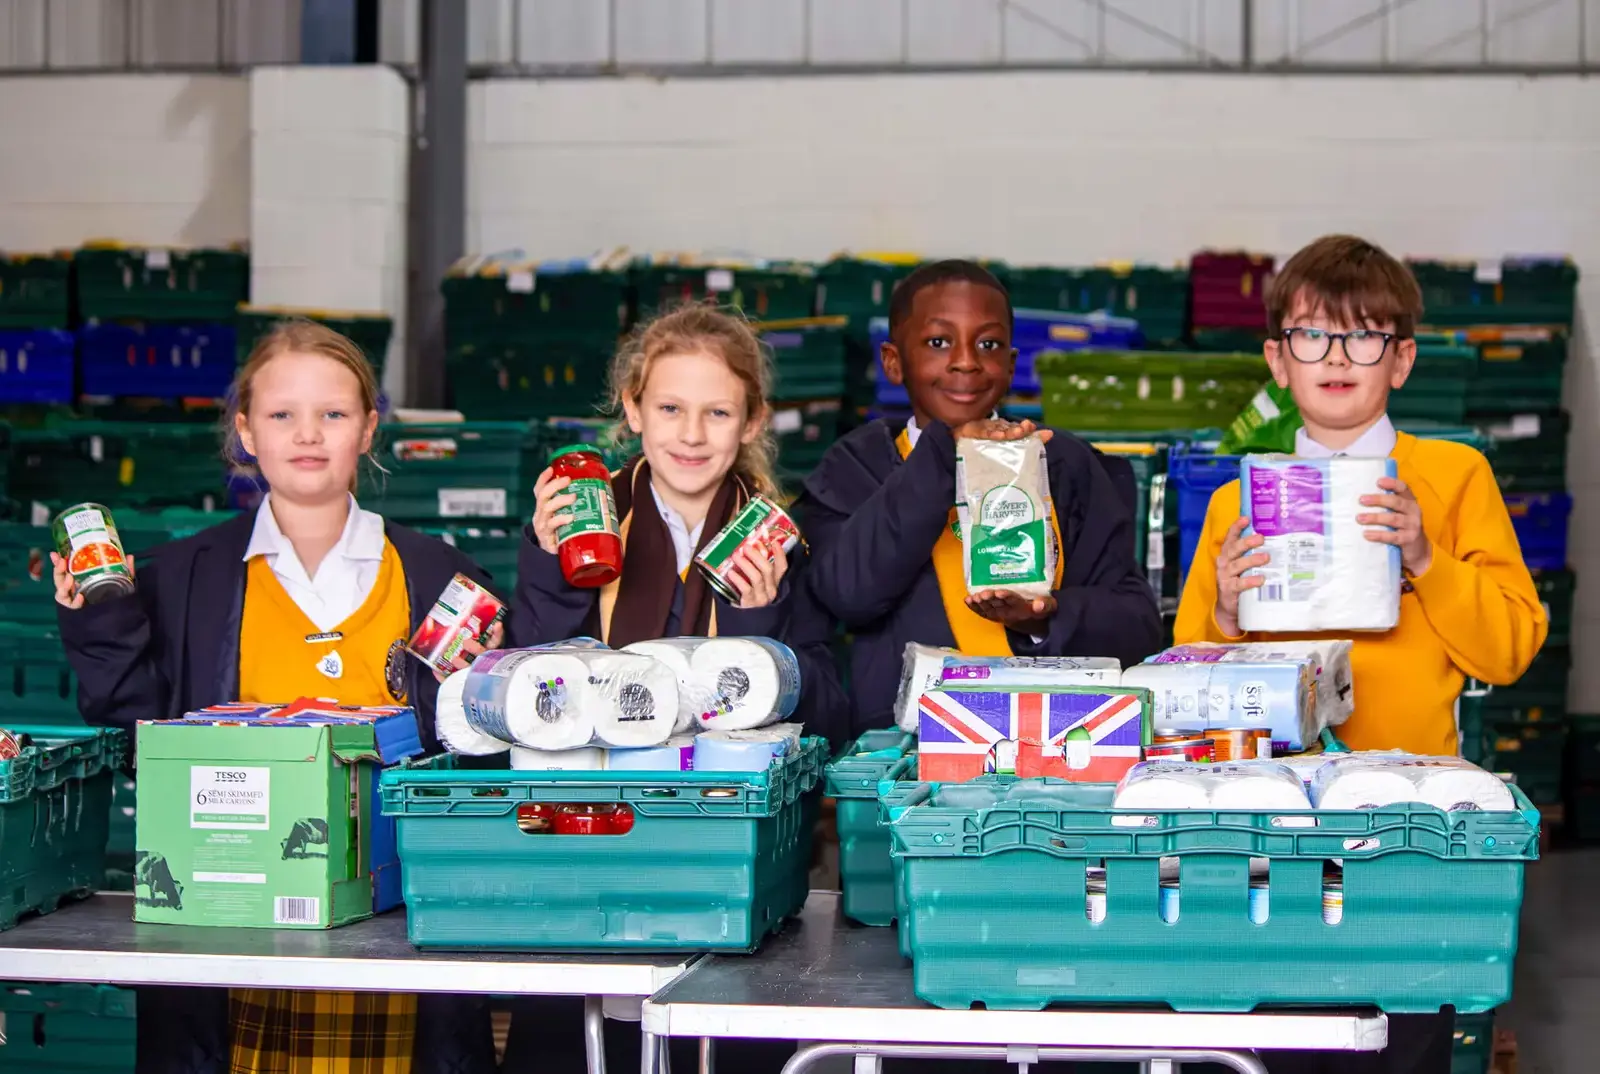 Chapter House pupils volunteering at a food bank